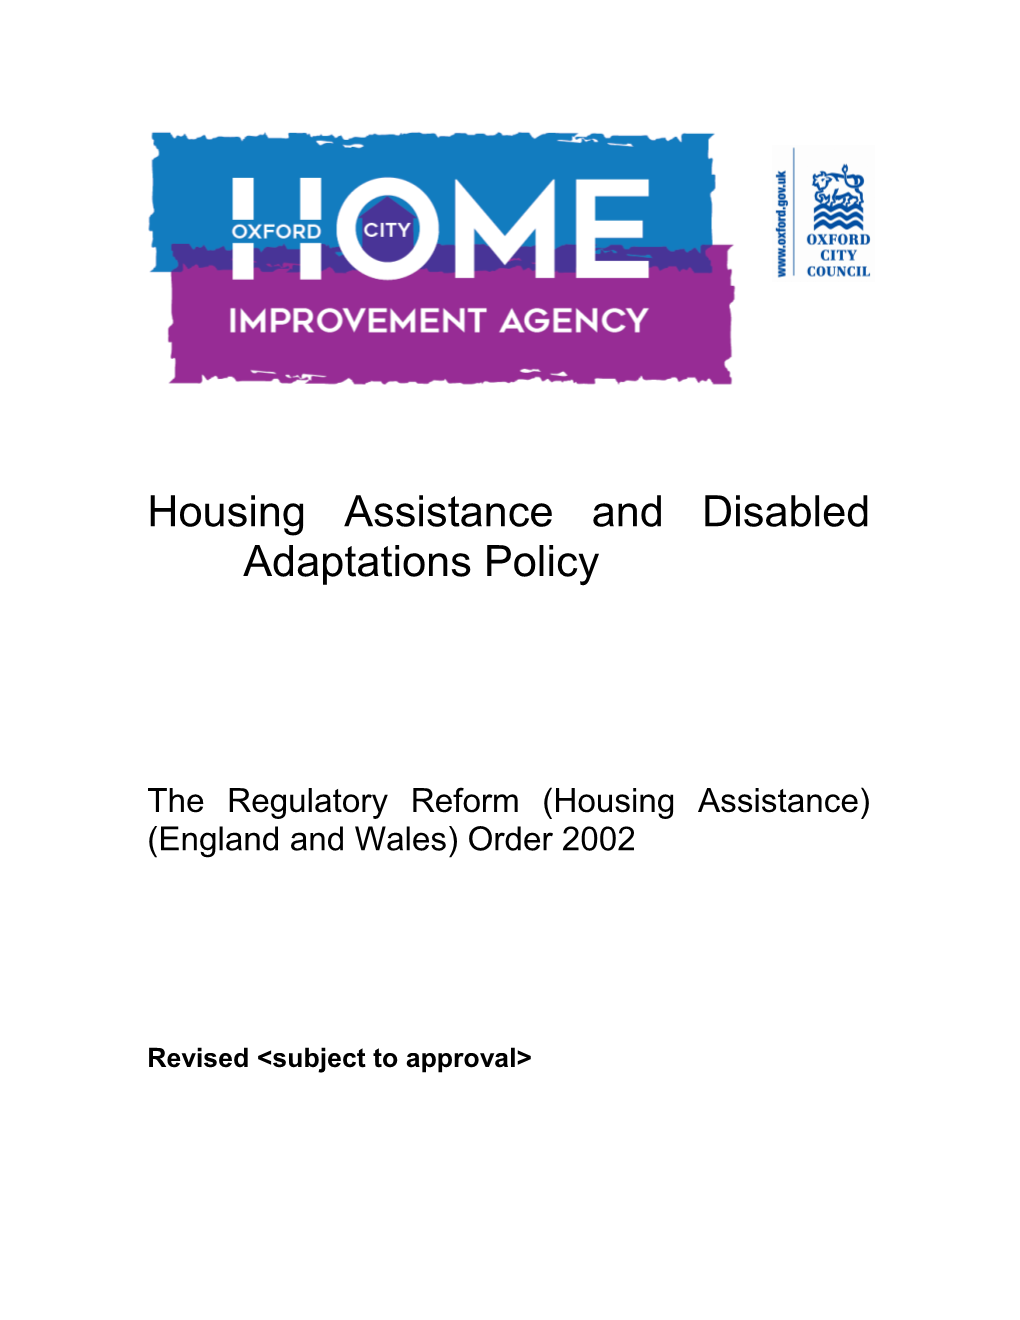 The Regulatory Reform (Housing Assistance) (England and Wales) Order 2002